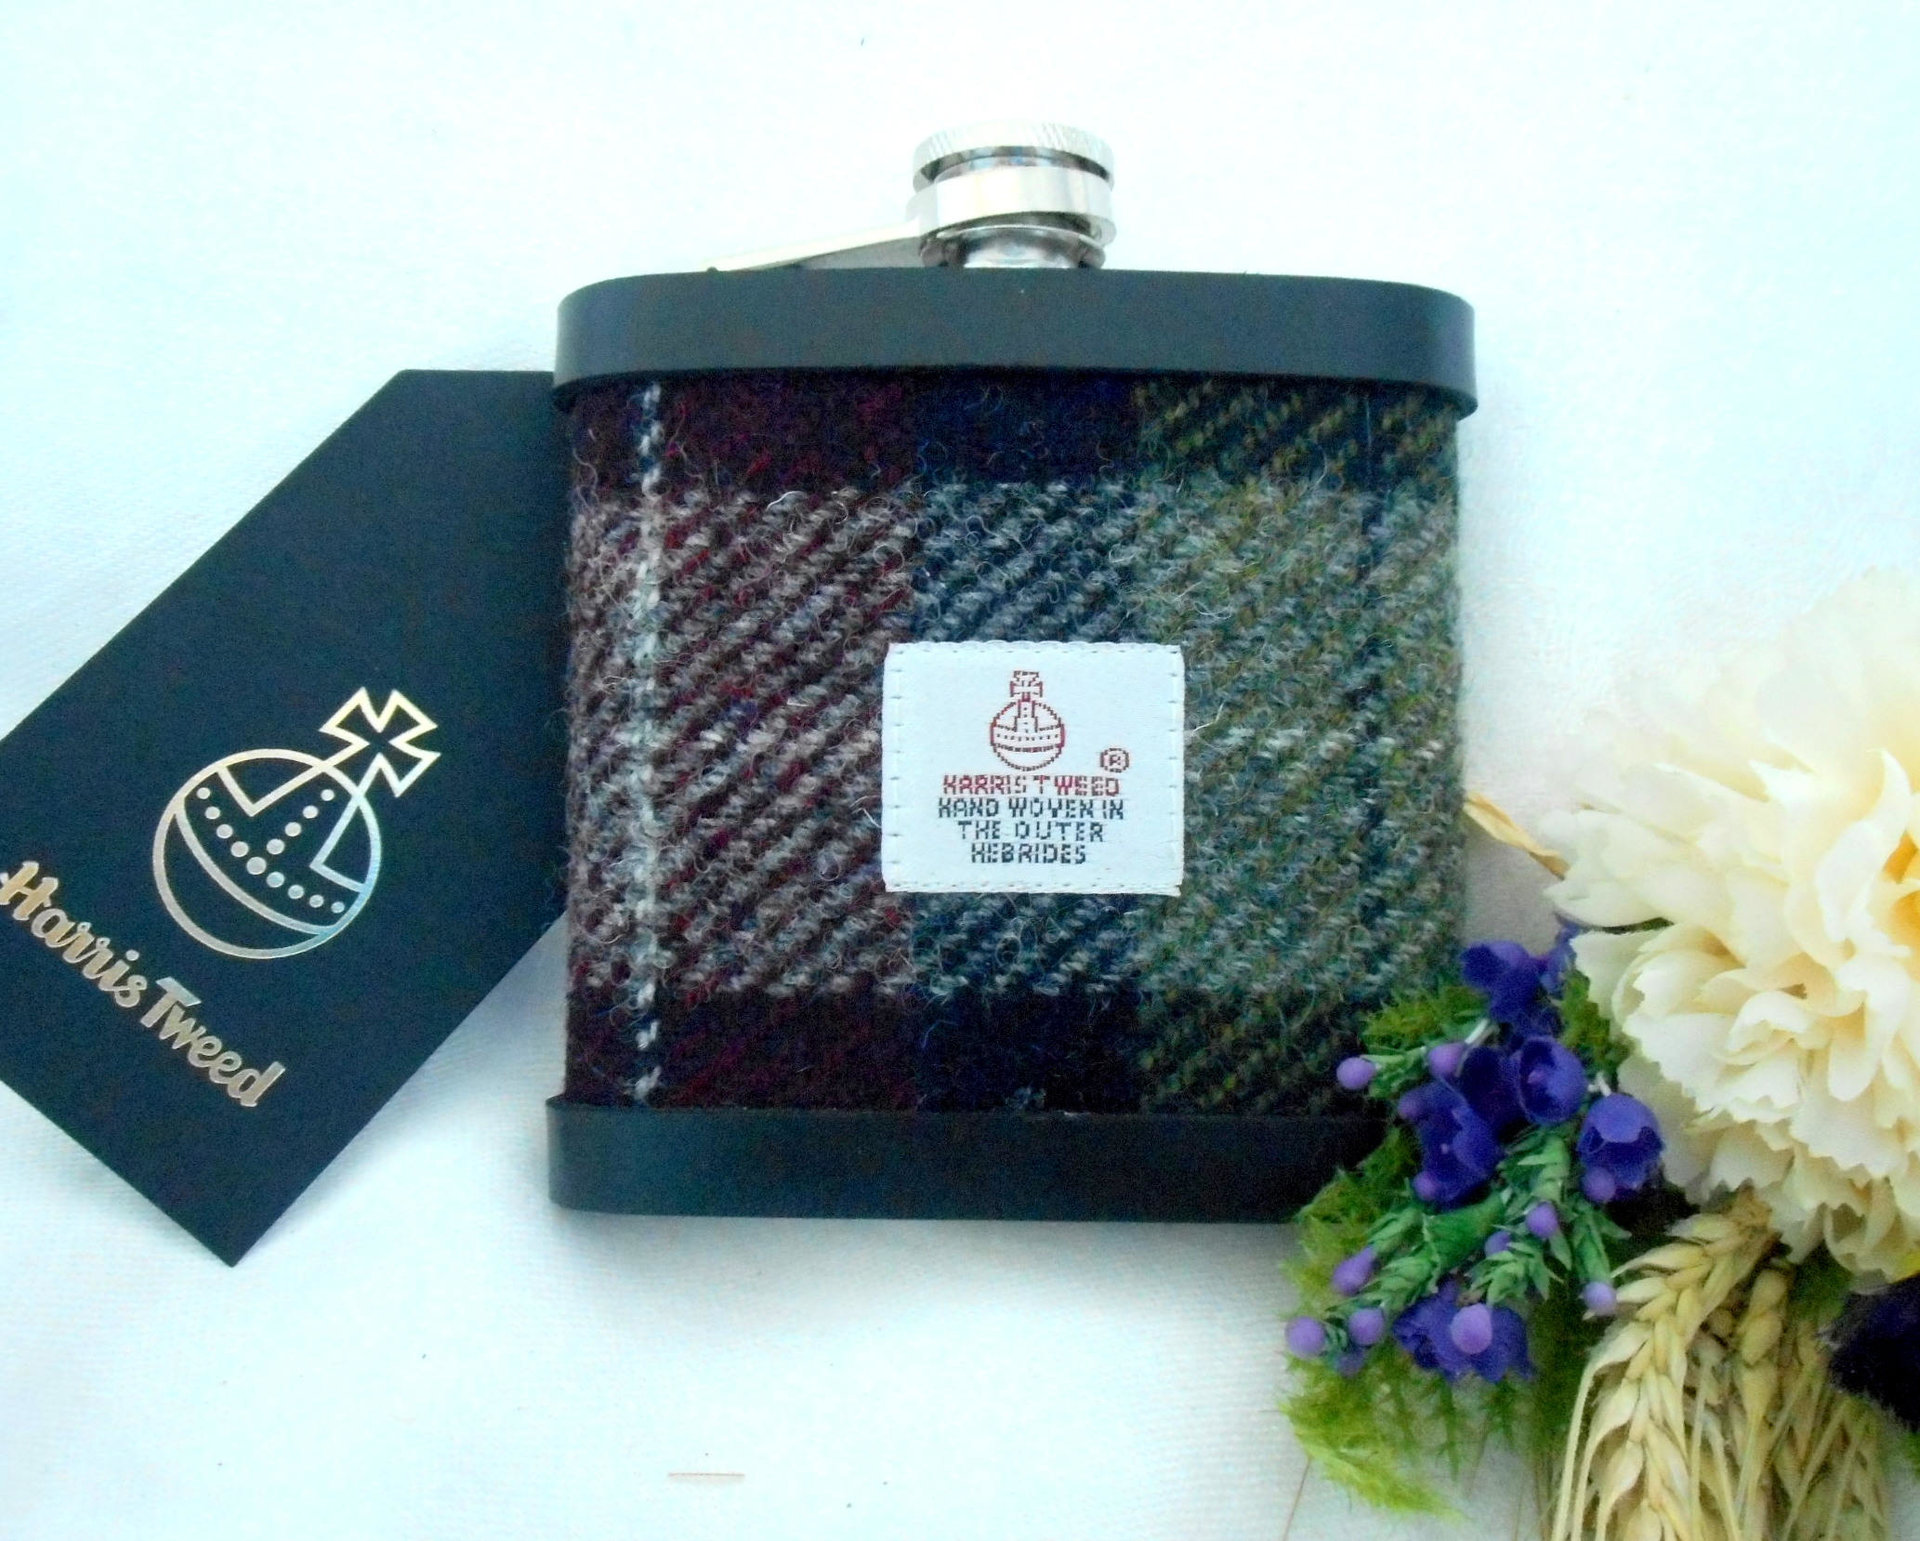 Harris Tweed hip flask deep red olive green and black mens gift made in scotland, ideal retirement birthday christmas present.